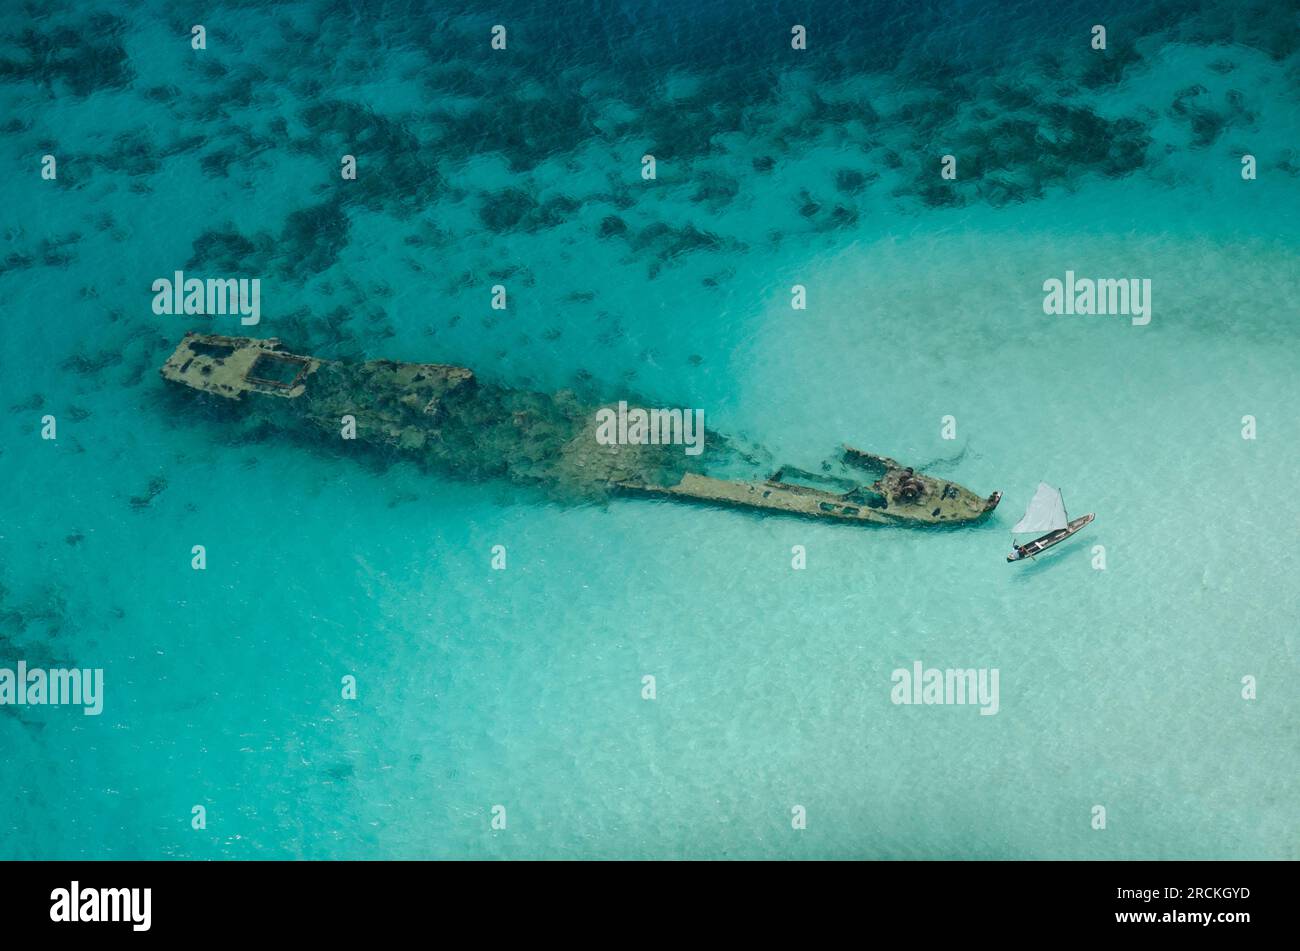 Aerial view of an old shipwreck in the san blas islands, Panama, Central America - stock photo Stock Photo